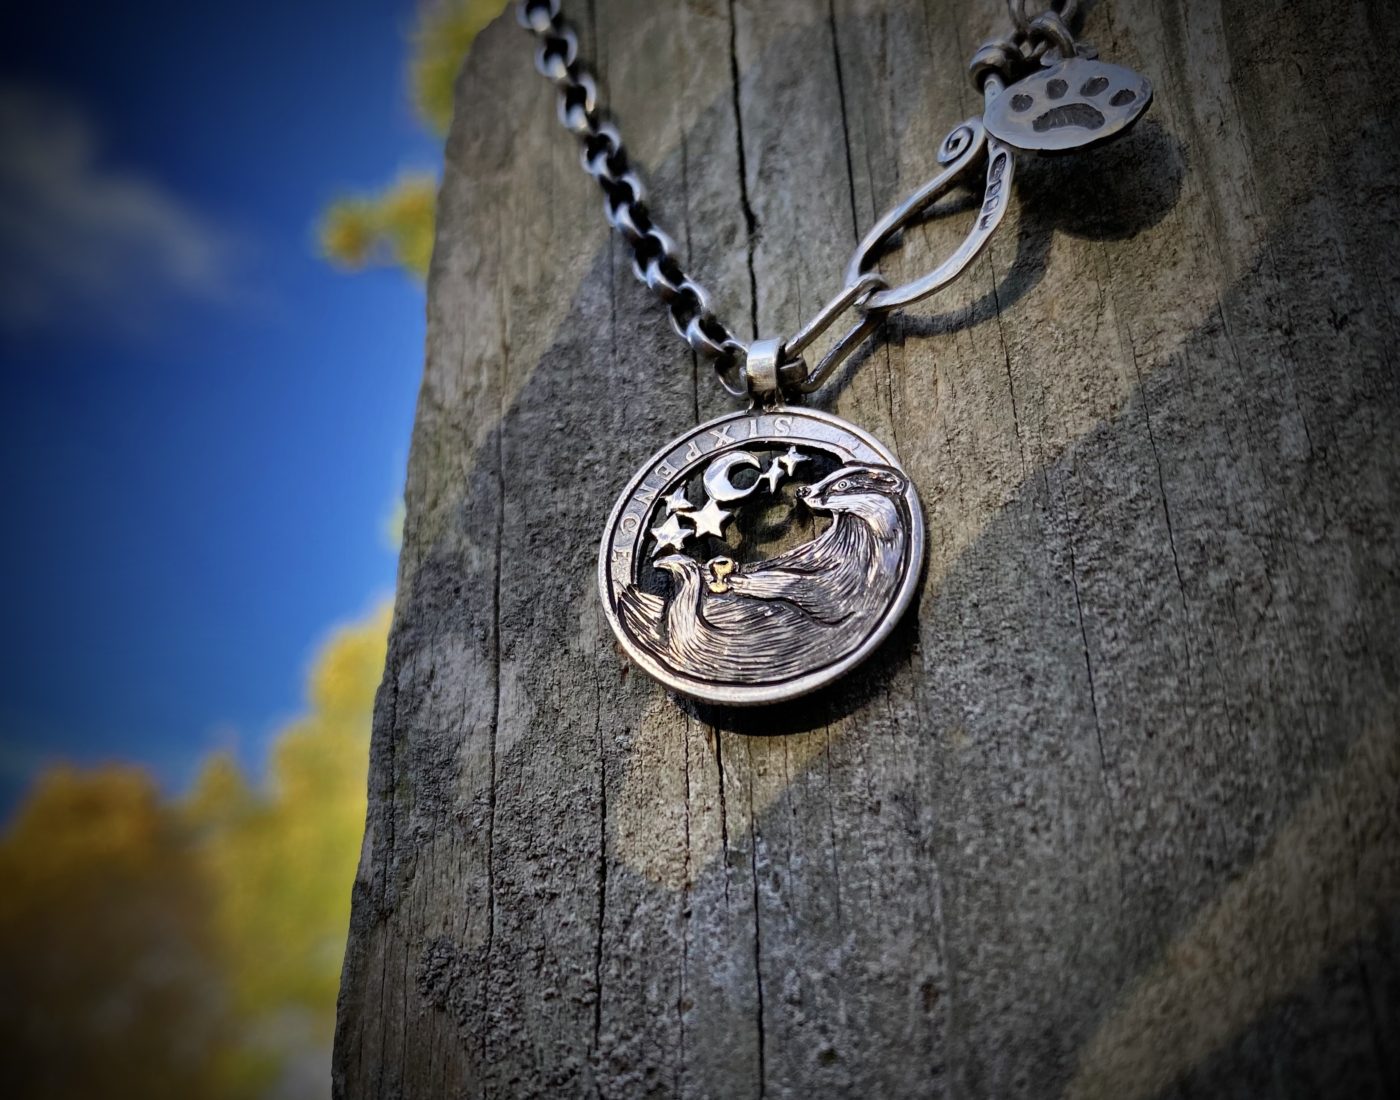 Handcrafted and recycled silver sixpence bklackbirdr necklace totally handcrafted and recycled from old sterling silver sixpence coins. Designed and created by Hairy Growler Jewellery, Cambridge, UK. necklace